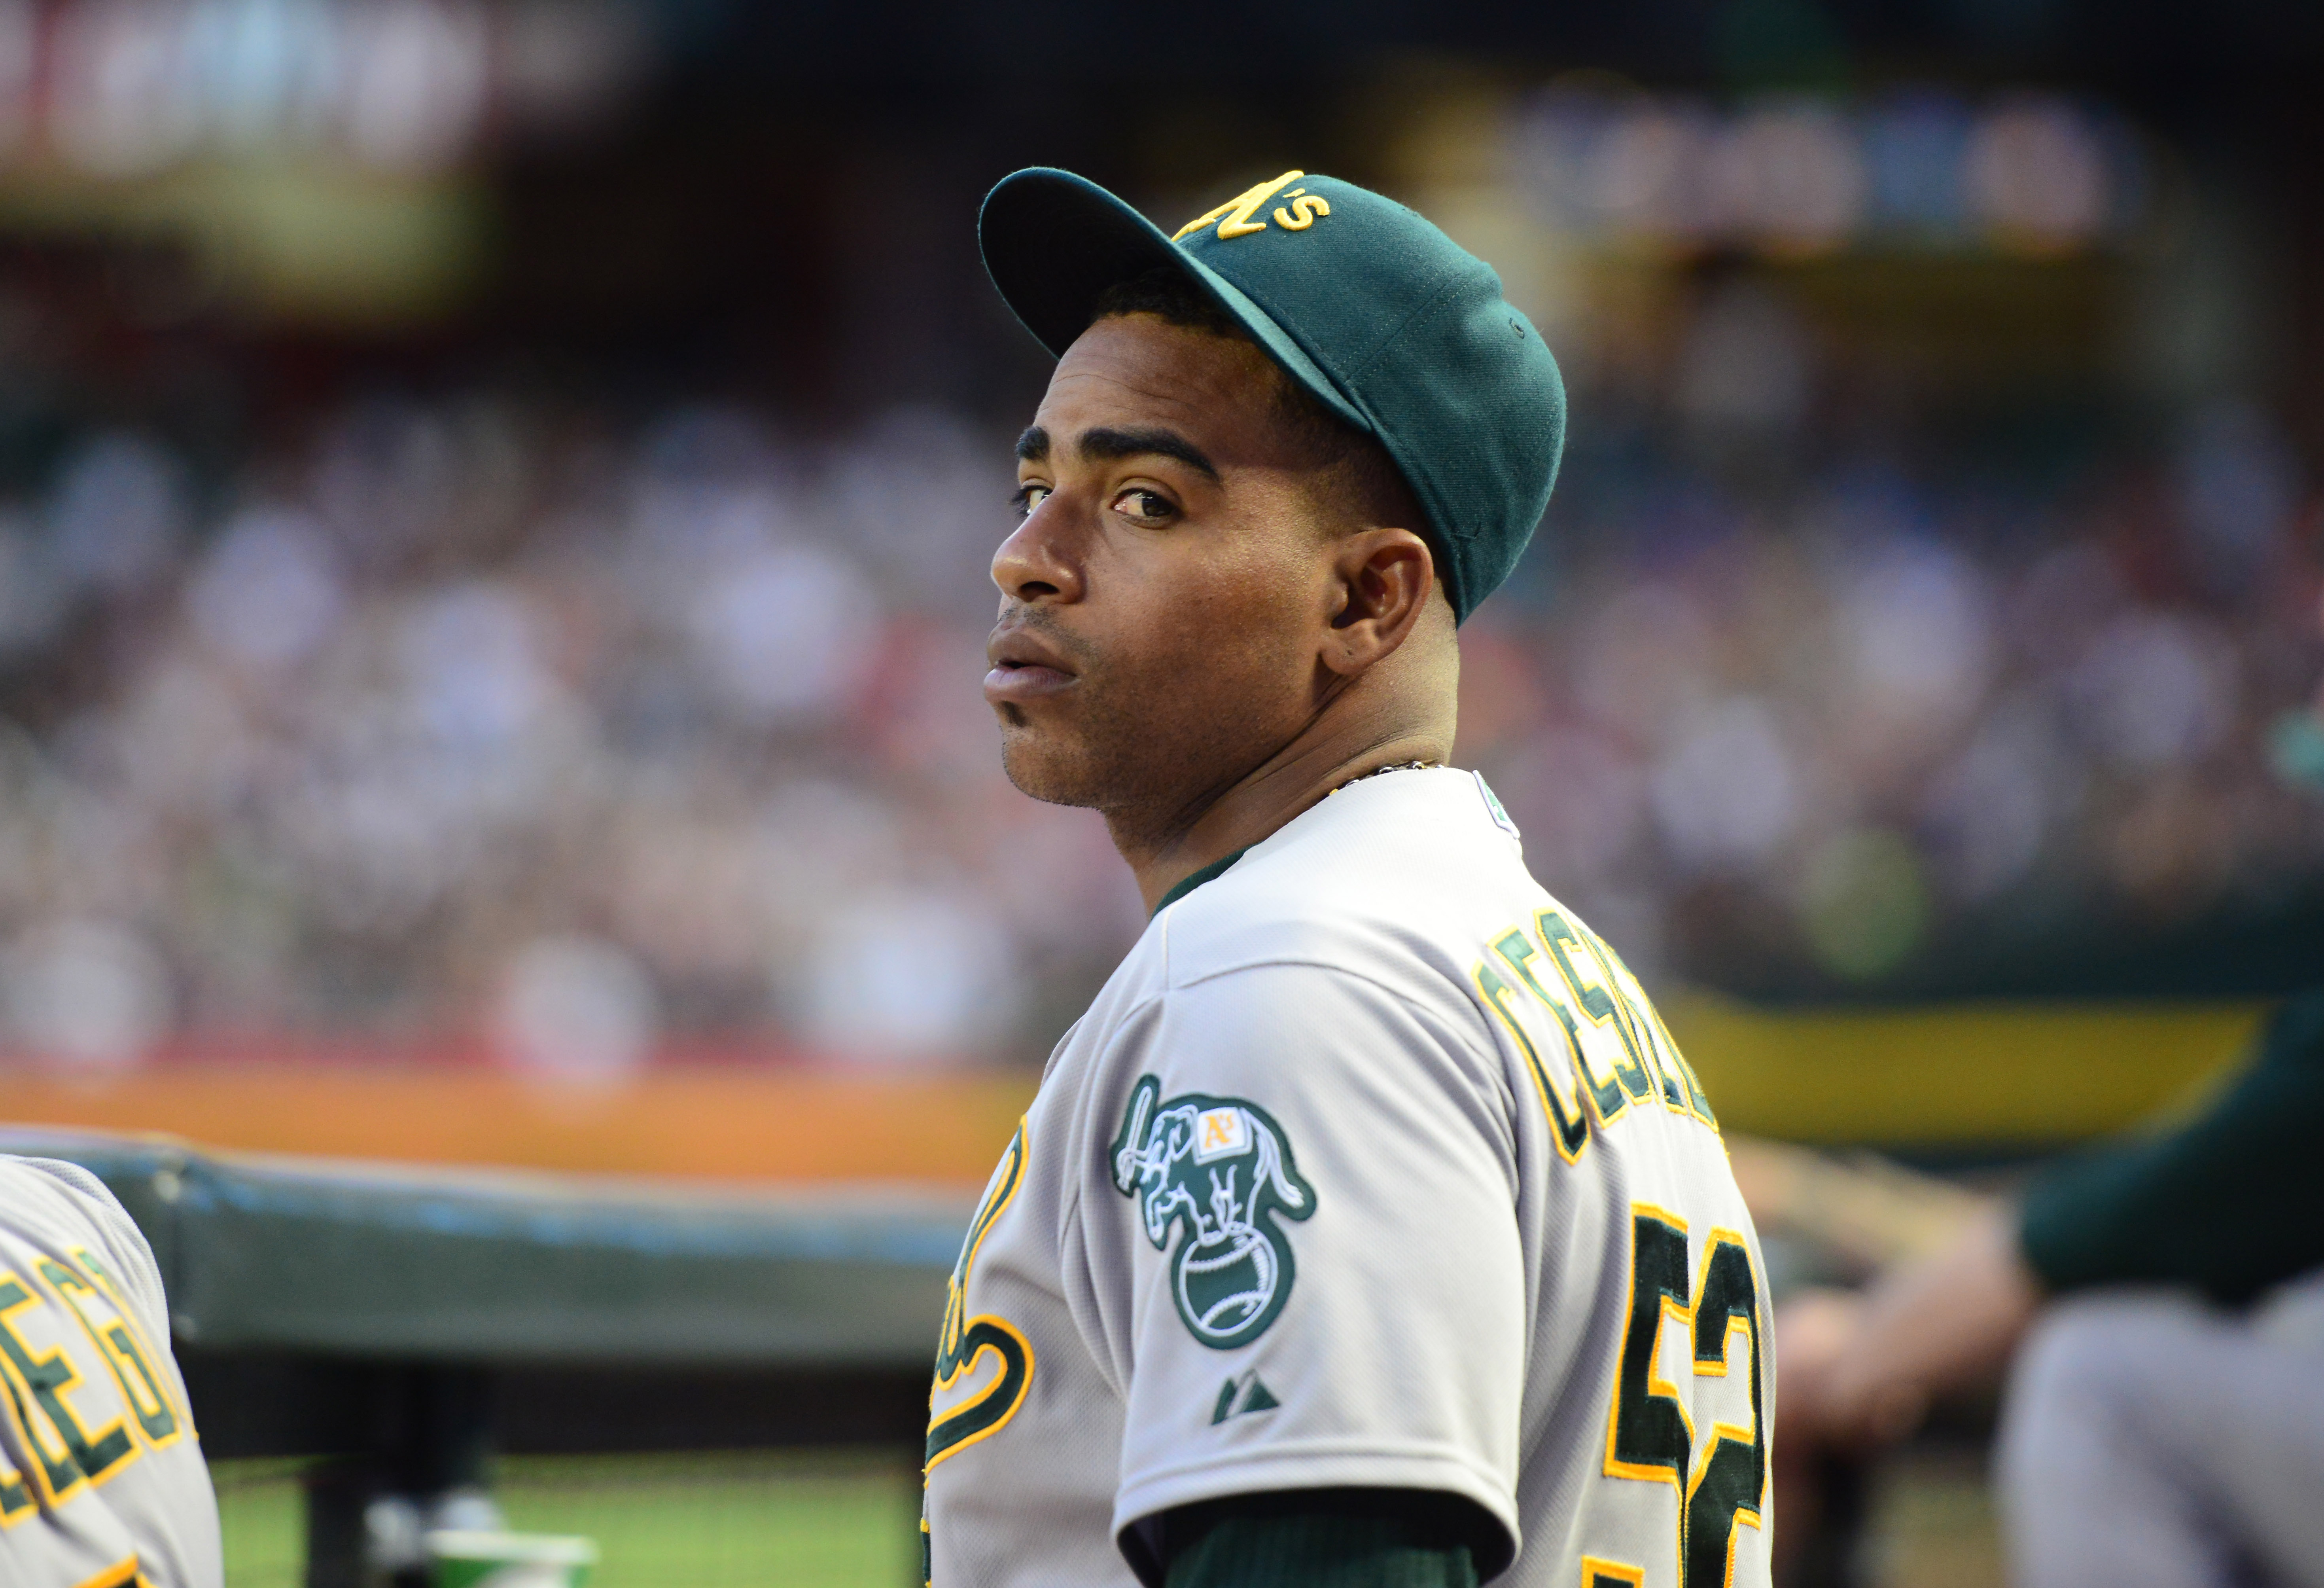 Yoenis Céspedes Makes Team Cuba's WBC Roster - Sports Illustrated